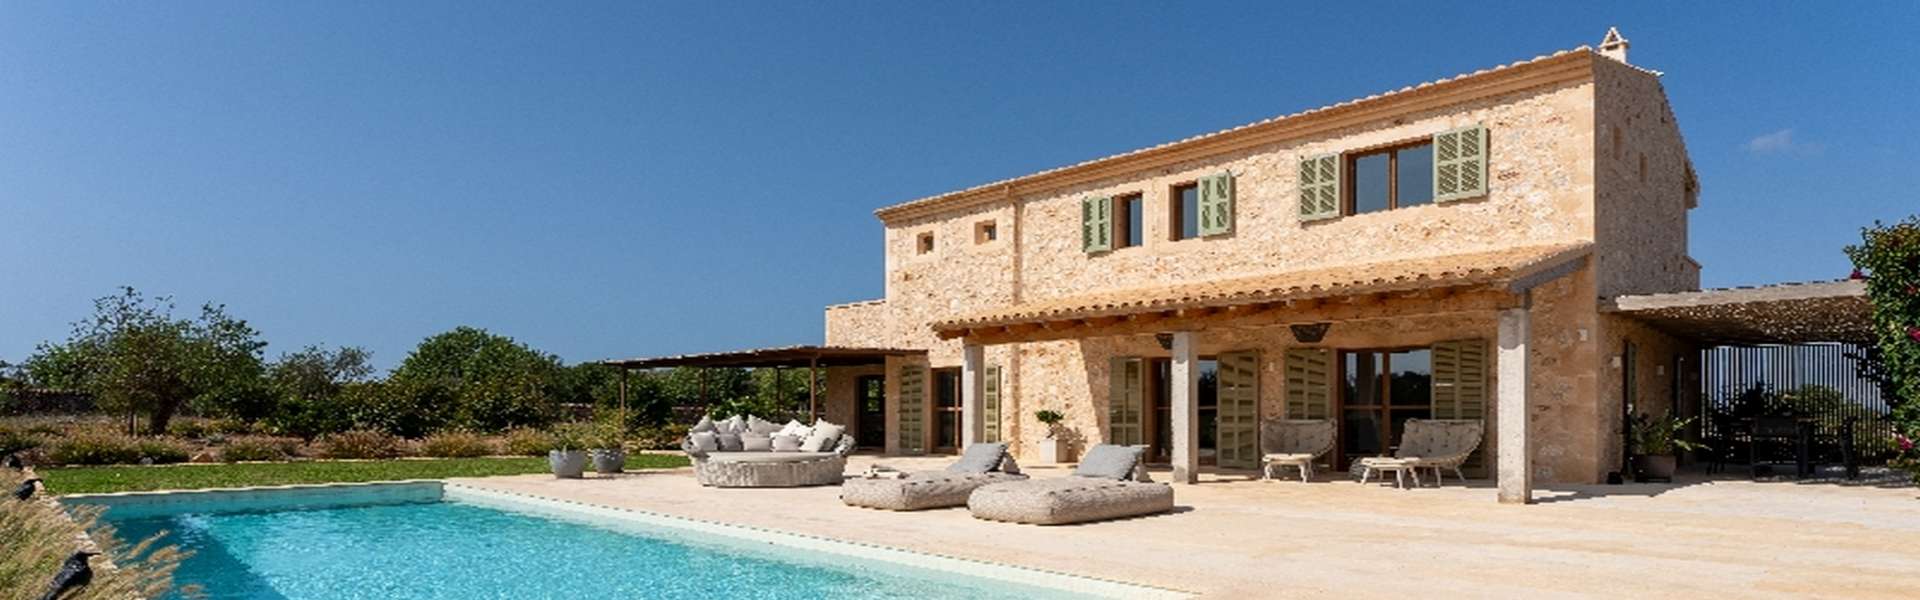 Stylish natural stone finca for sale near Ses Salines